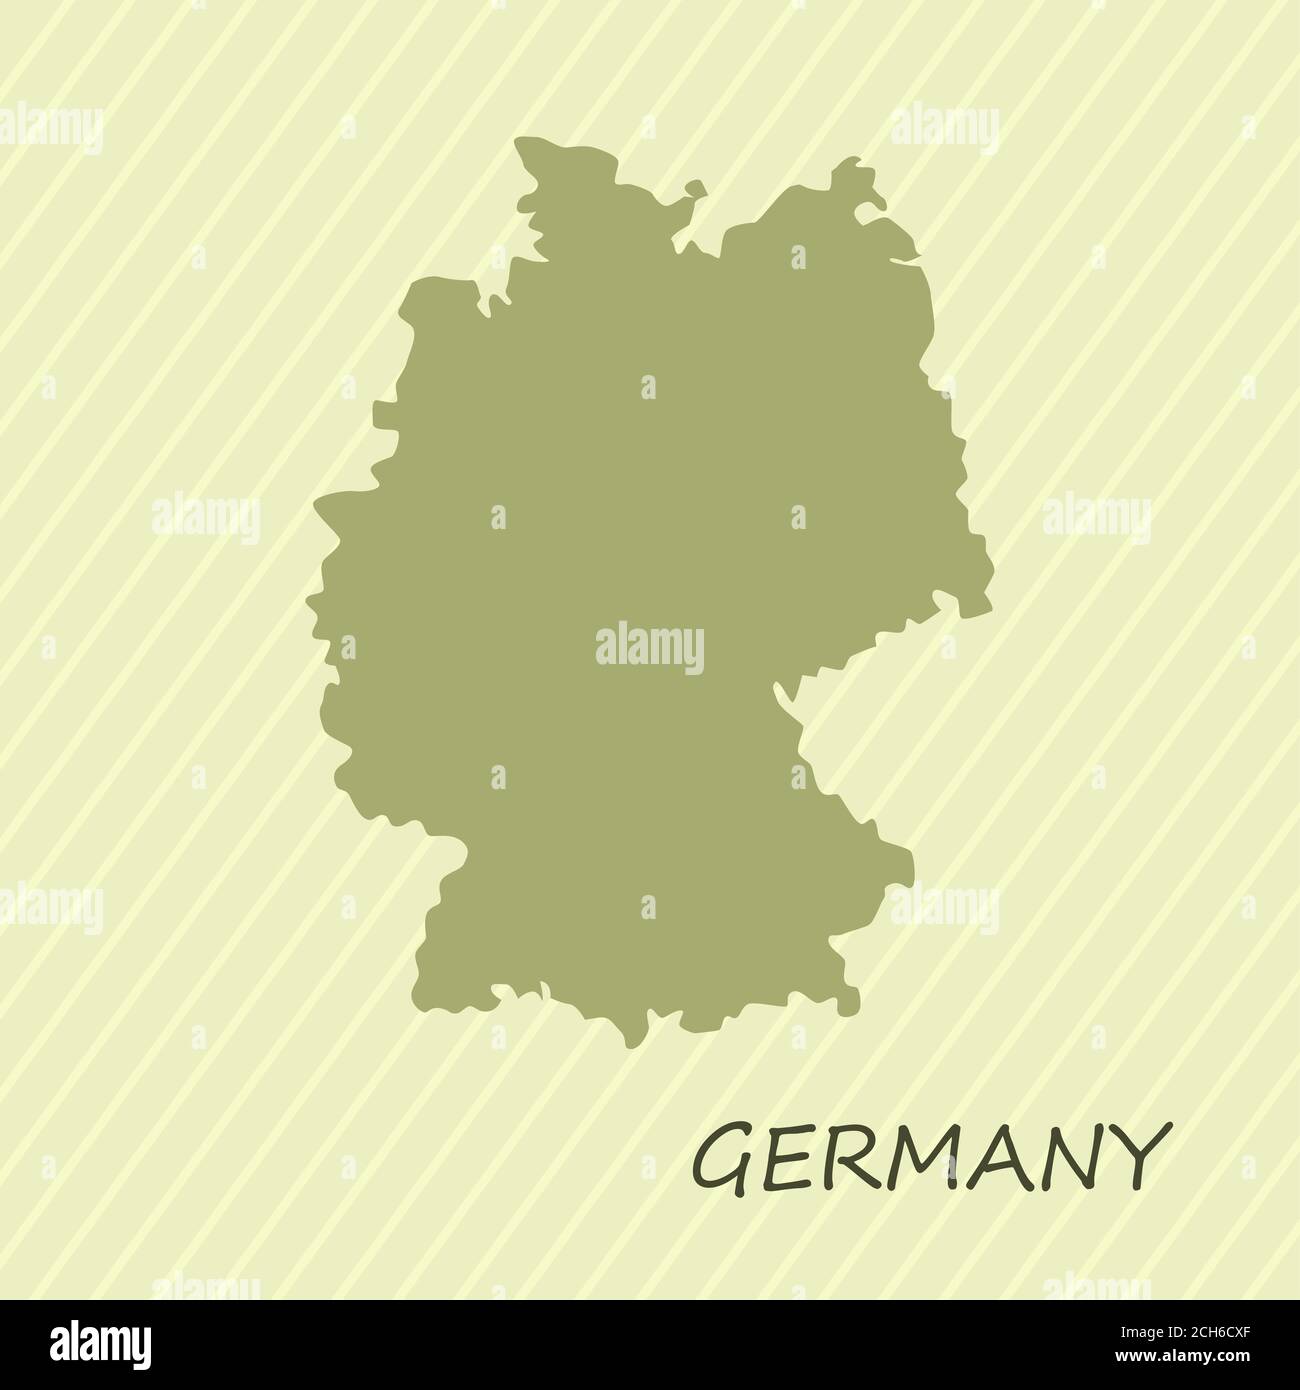 Germany poster print for wall art. Canvas map for wall decor. Vector illustration Stock Photo